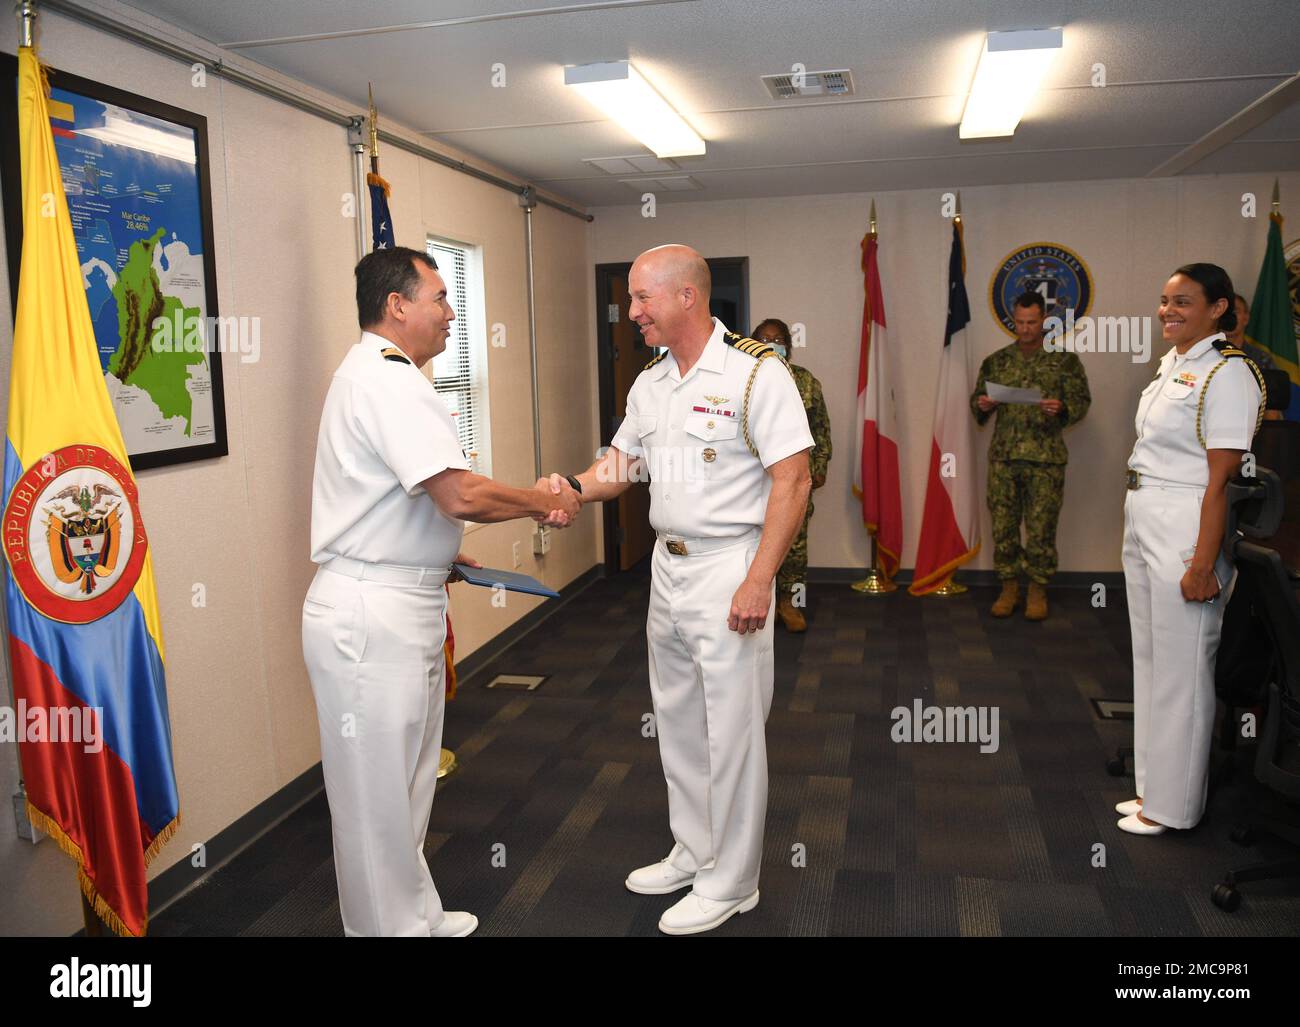 220628-N-DB801-0344  MAYPORT, Fla. – (June 28, 2022) – Colombian navy Capt. Nelson Villalba, left, a Foreign Liaison Officer assigned to U.S. Naval Forces Southern Command/U.S. 4th Fleet shakes hands with Capt. Michael Weaver, U.S. 4th Fleet Chief of Staff, after receiving the Navy and Marine Corps Commendation Medal during his end of tour award ceremony at fleet headquarters, June 28, 2022. Villalba served at U.S. 4th Fleet from Jan. 1, 2021 to June 30, 2022. U.S. Naval Forces Southern Command/U.S. 4th Fleet supports U.S. Southern Command’s joint and combined military operations by employing Stock Photo